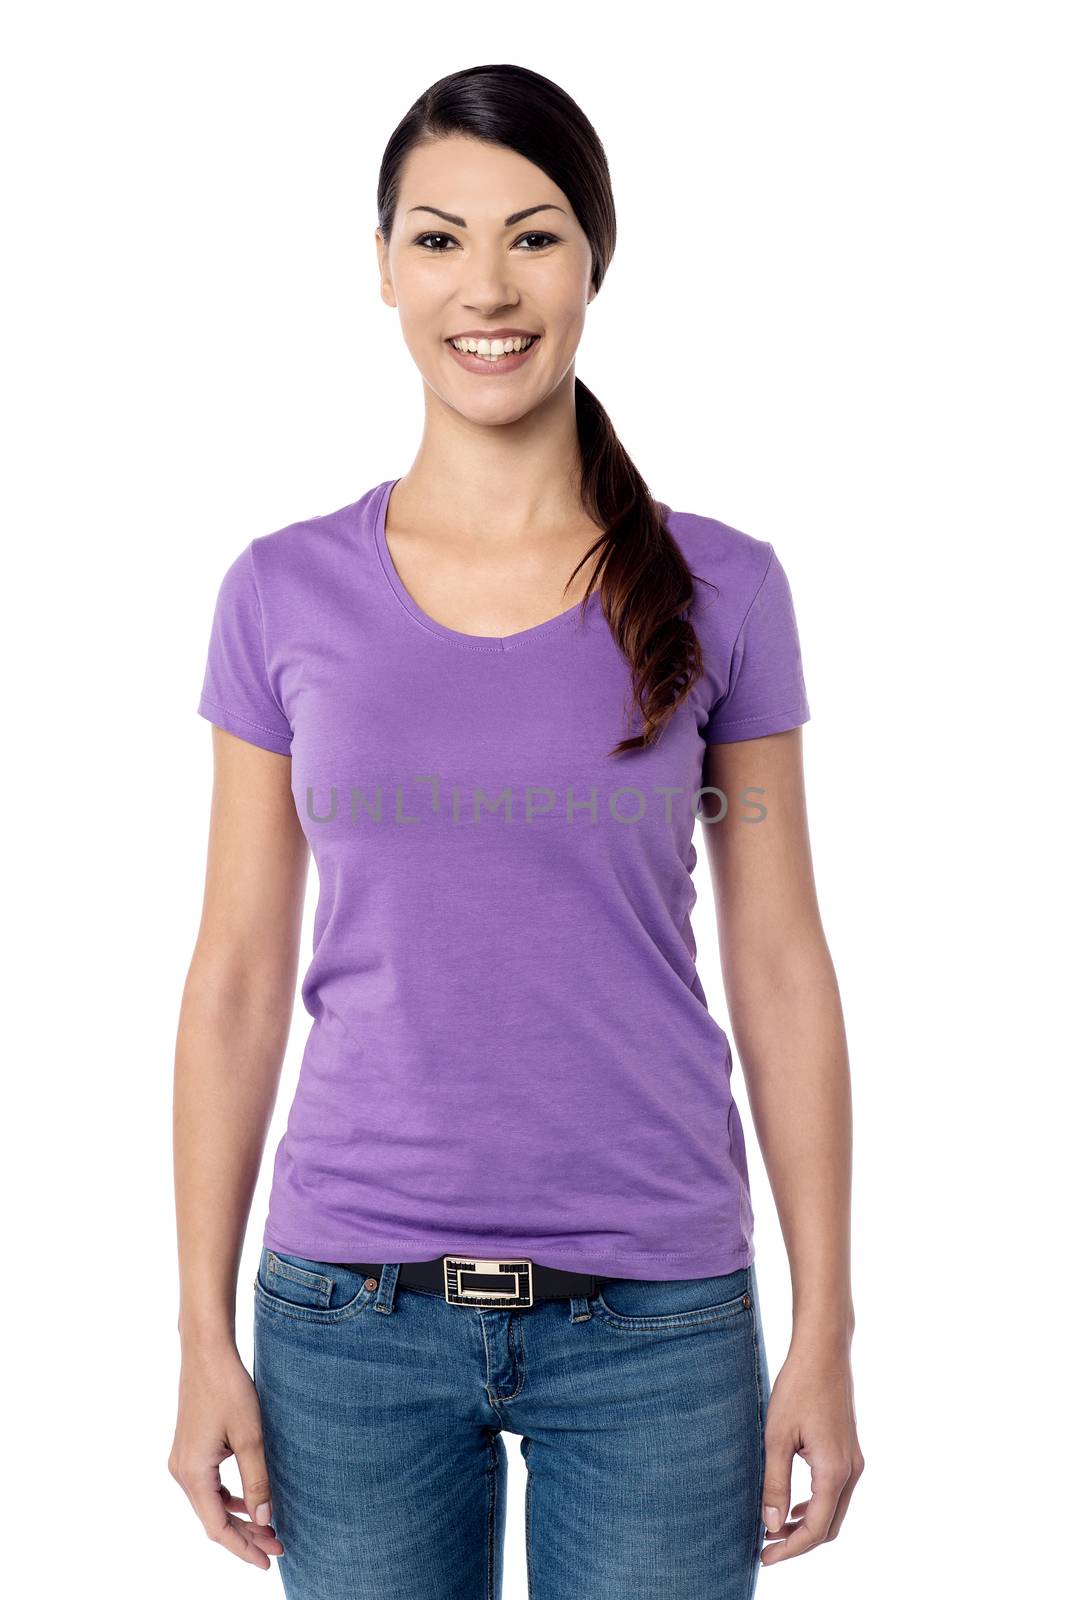 Casual pose of happy young woman over white